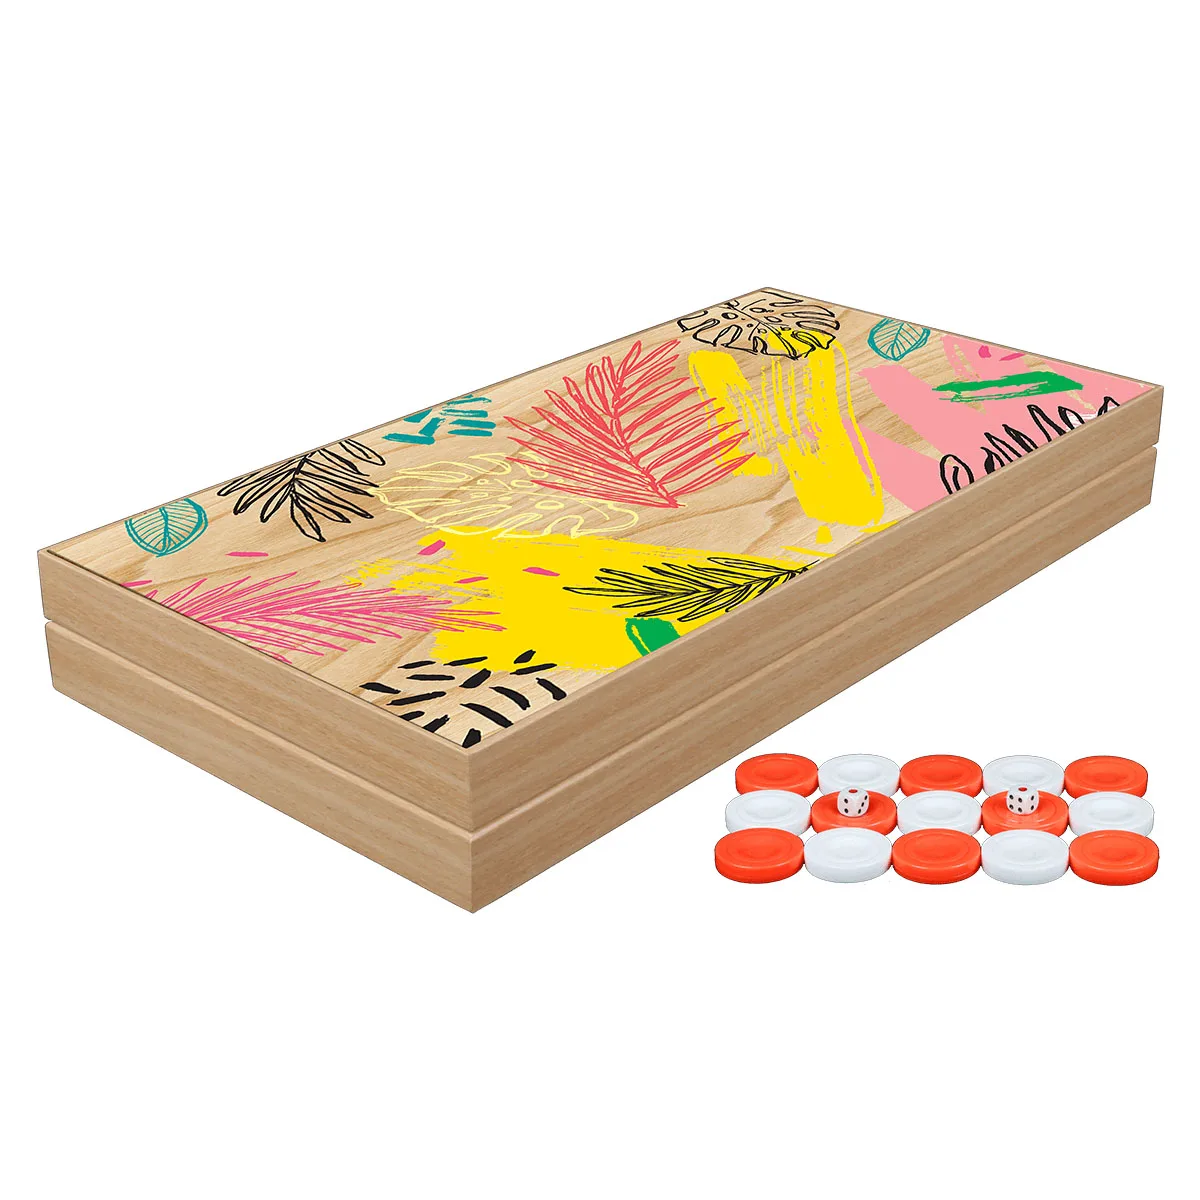 Classic Wood Tropic Luxury Backgammon Game Set With Pieces